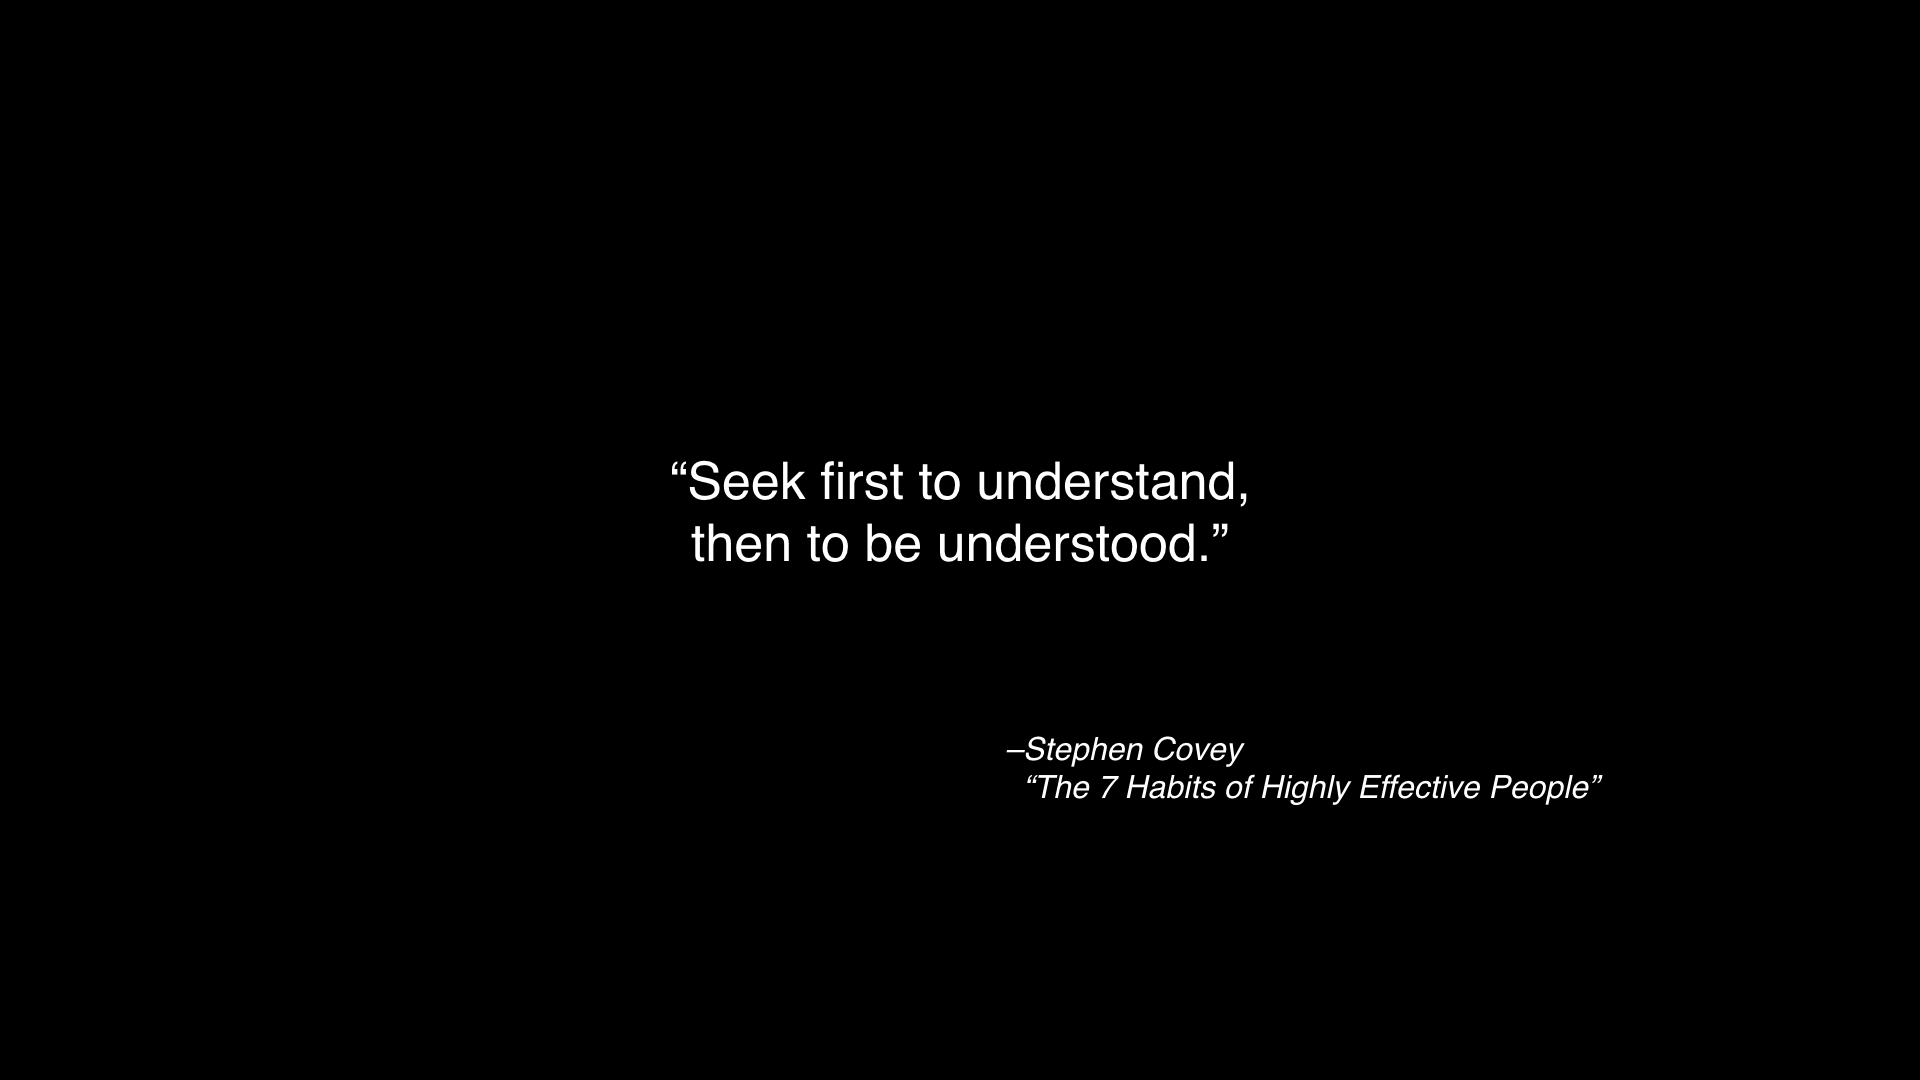 Quote: 'Seek first to understand, then to be understood.' From 'The 7 Habits of Highly Effective People' by Stephen Covey